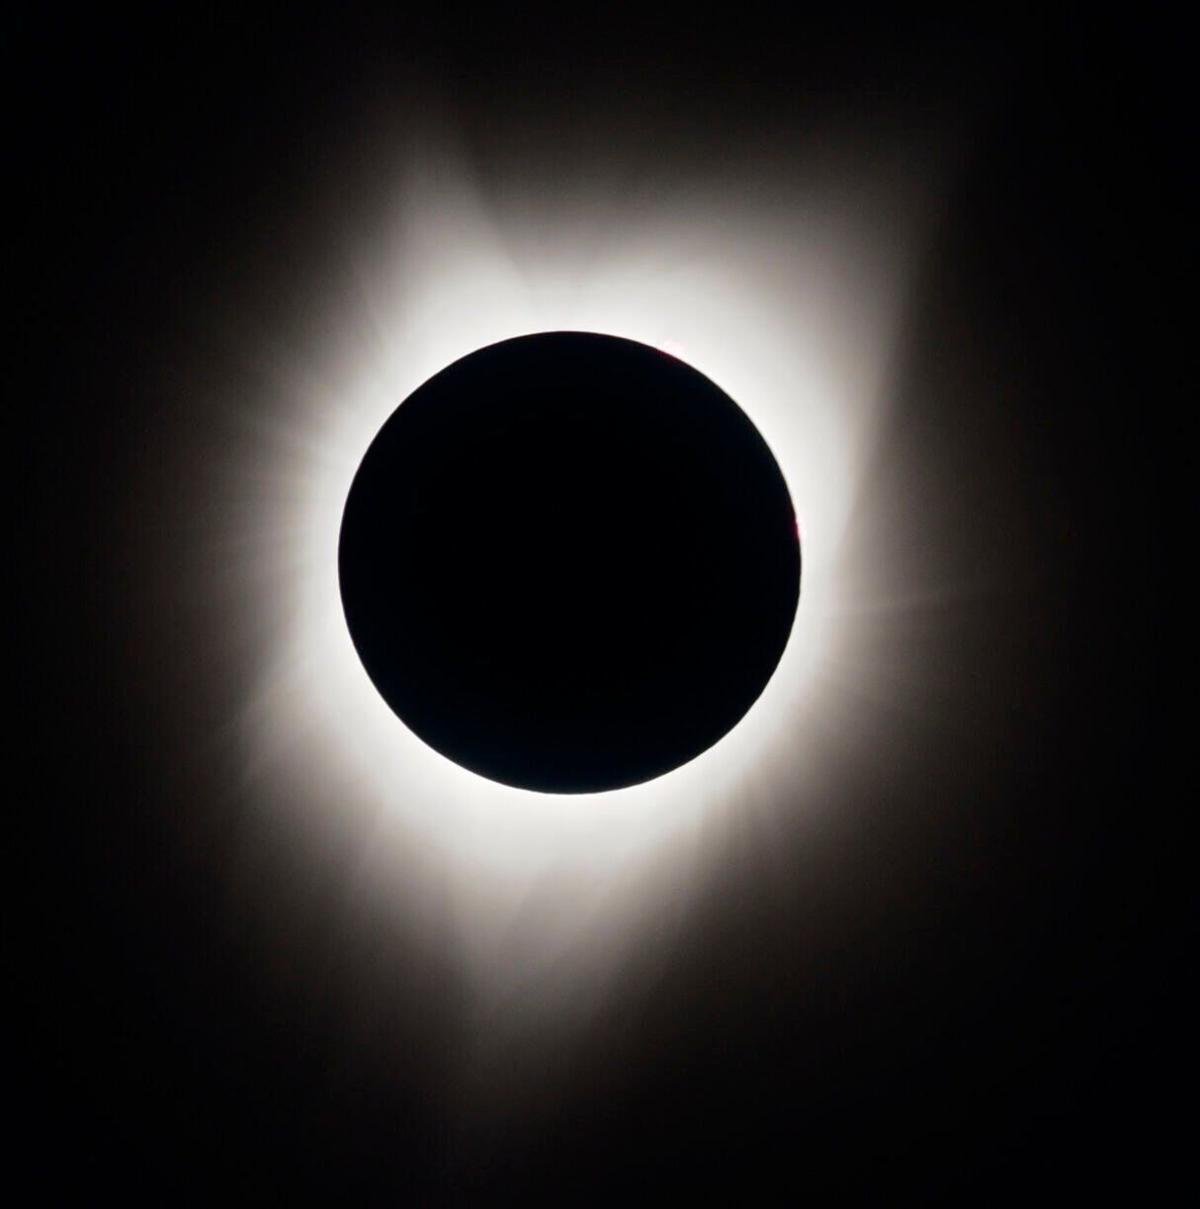 US to witness rare 'ring of fire' solar eclipse on Saturday, Nasa